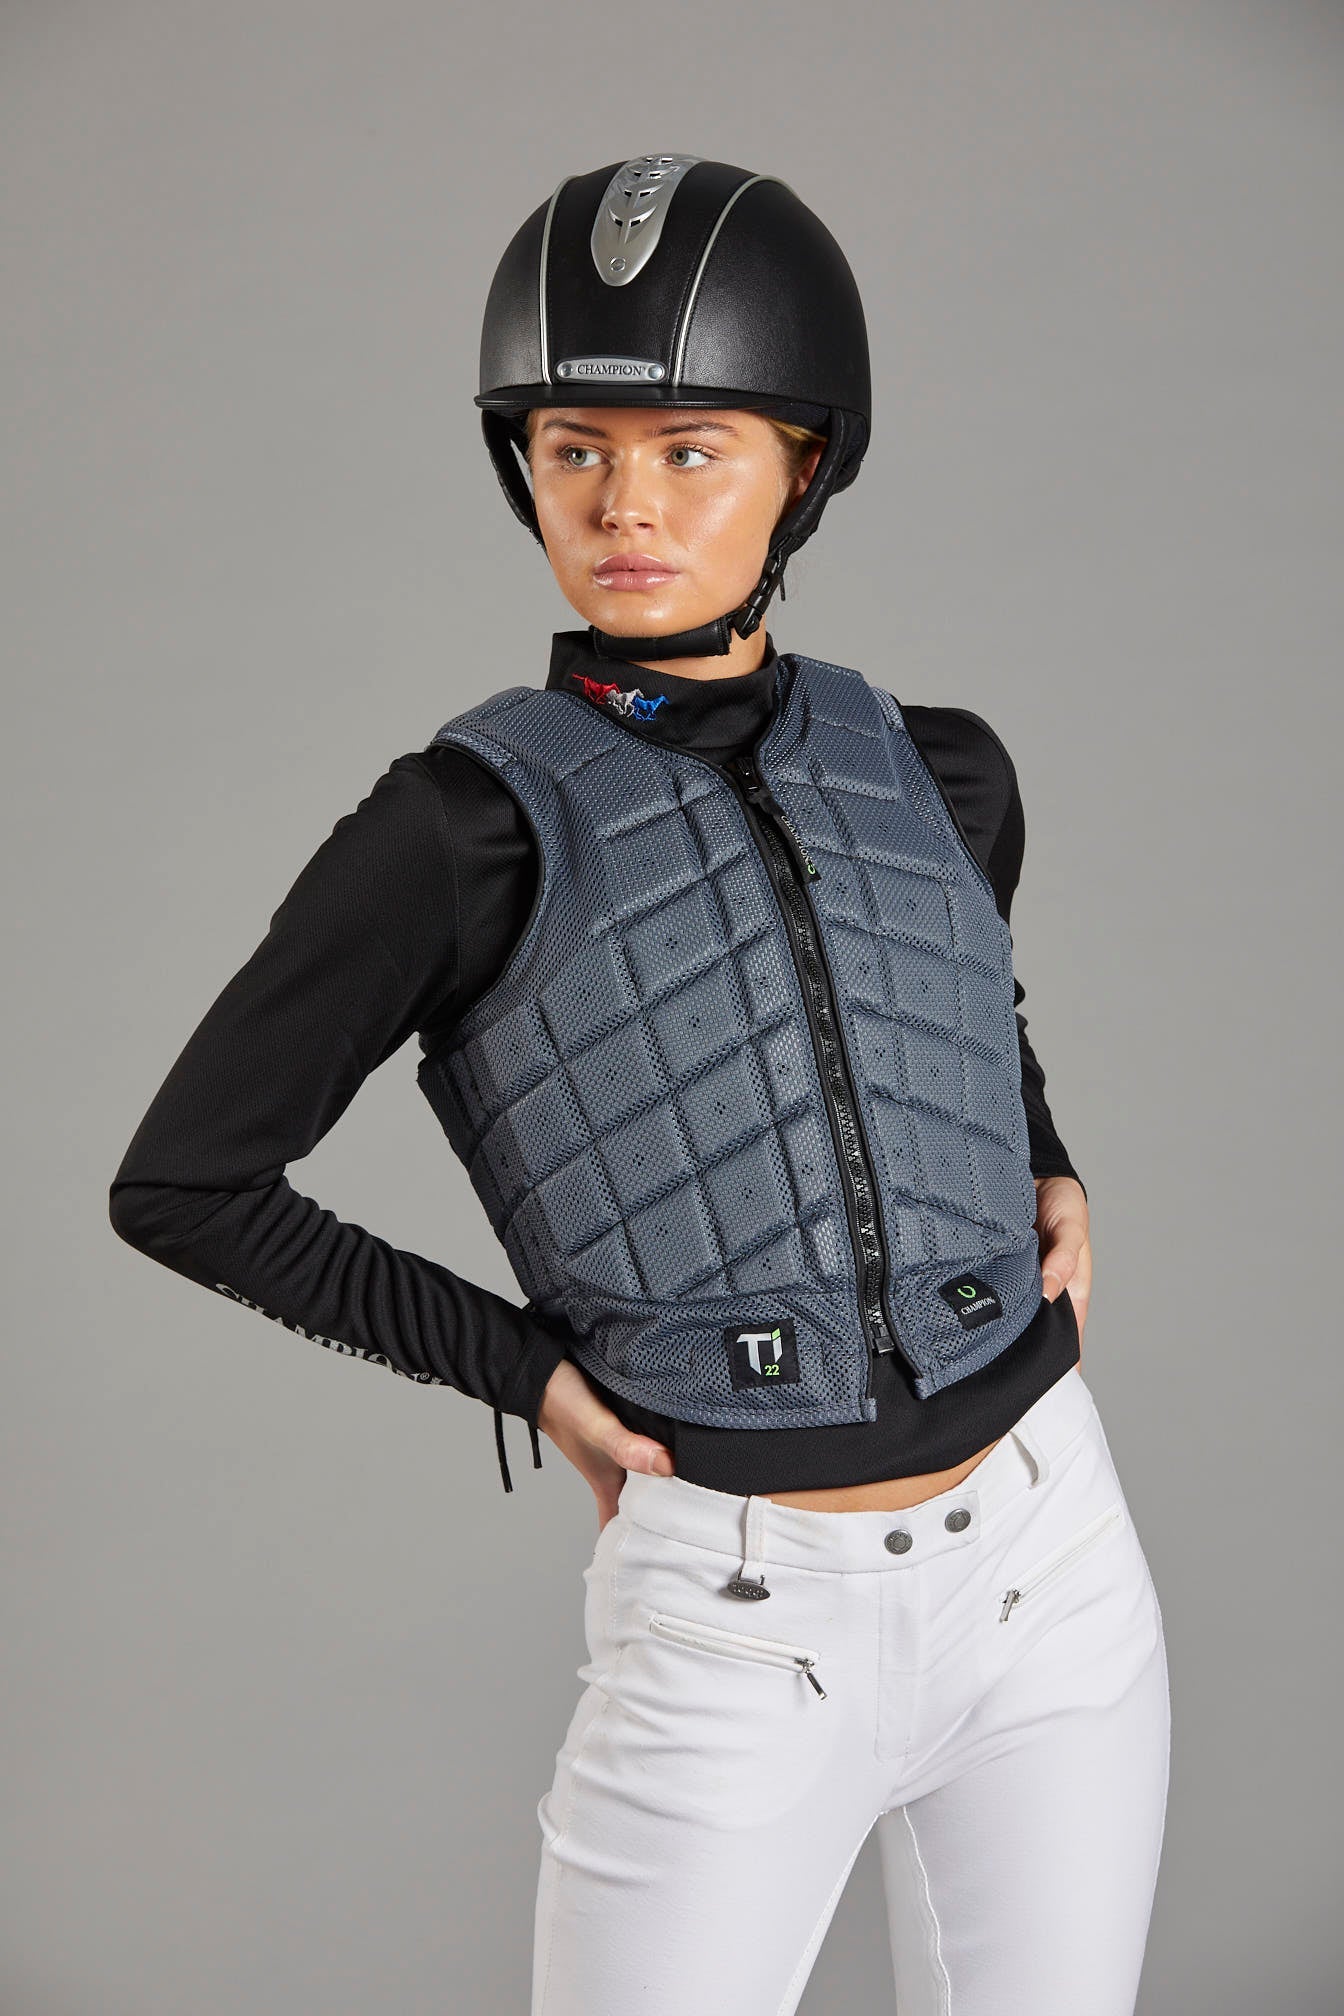 Rider wearing both helmet and body protectors